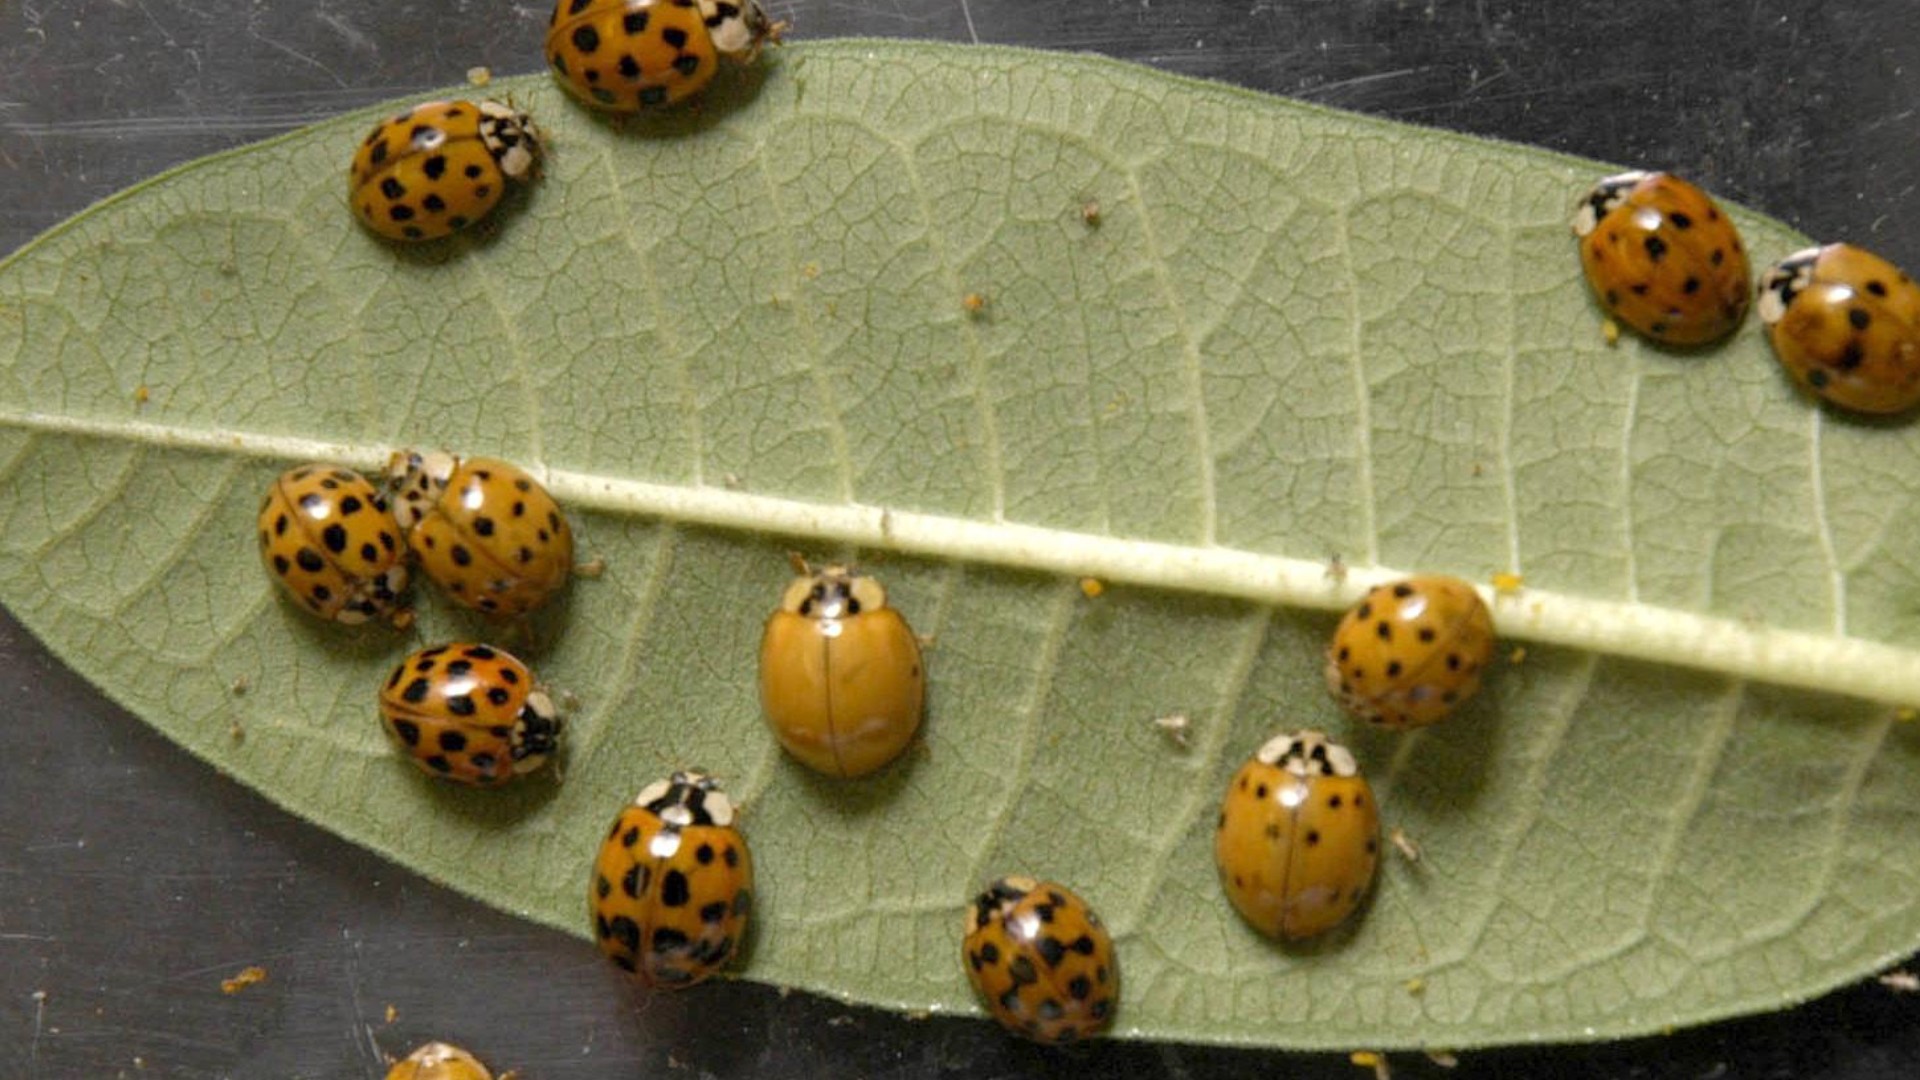 They look like lady bugs, but they are something totally different! And it turns out, they make your pet sick